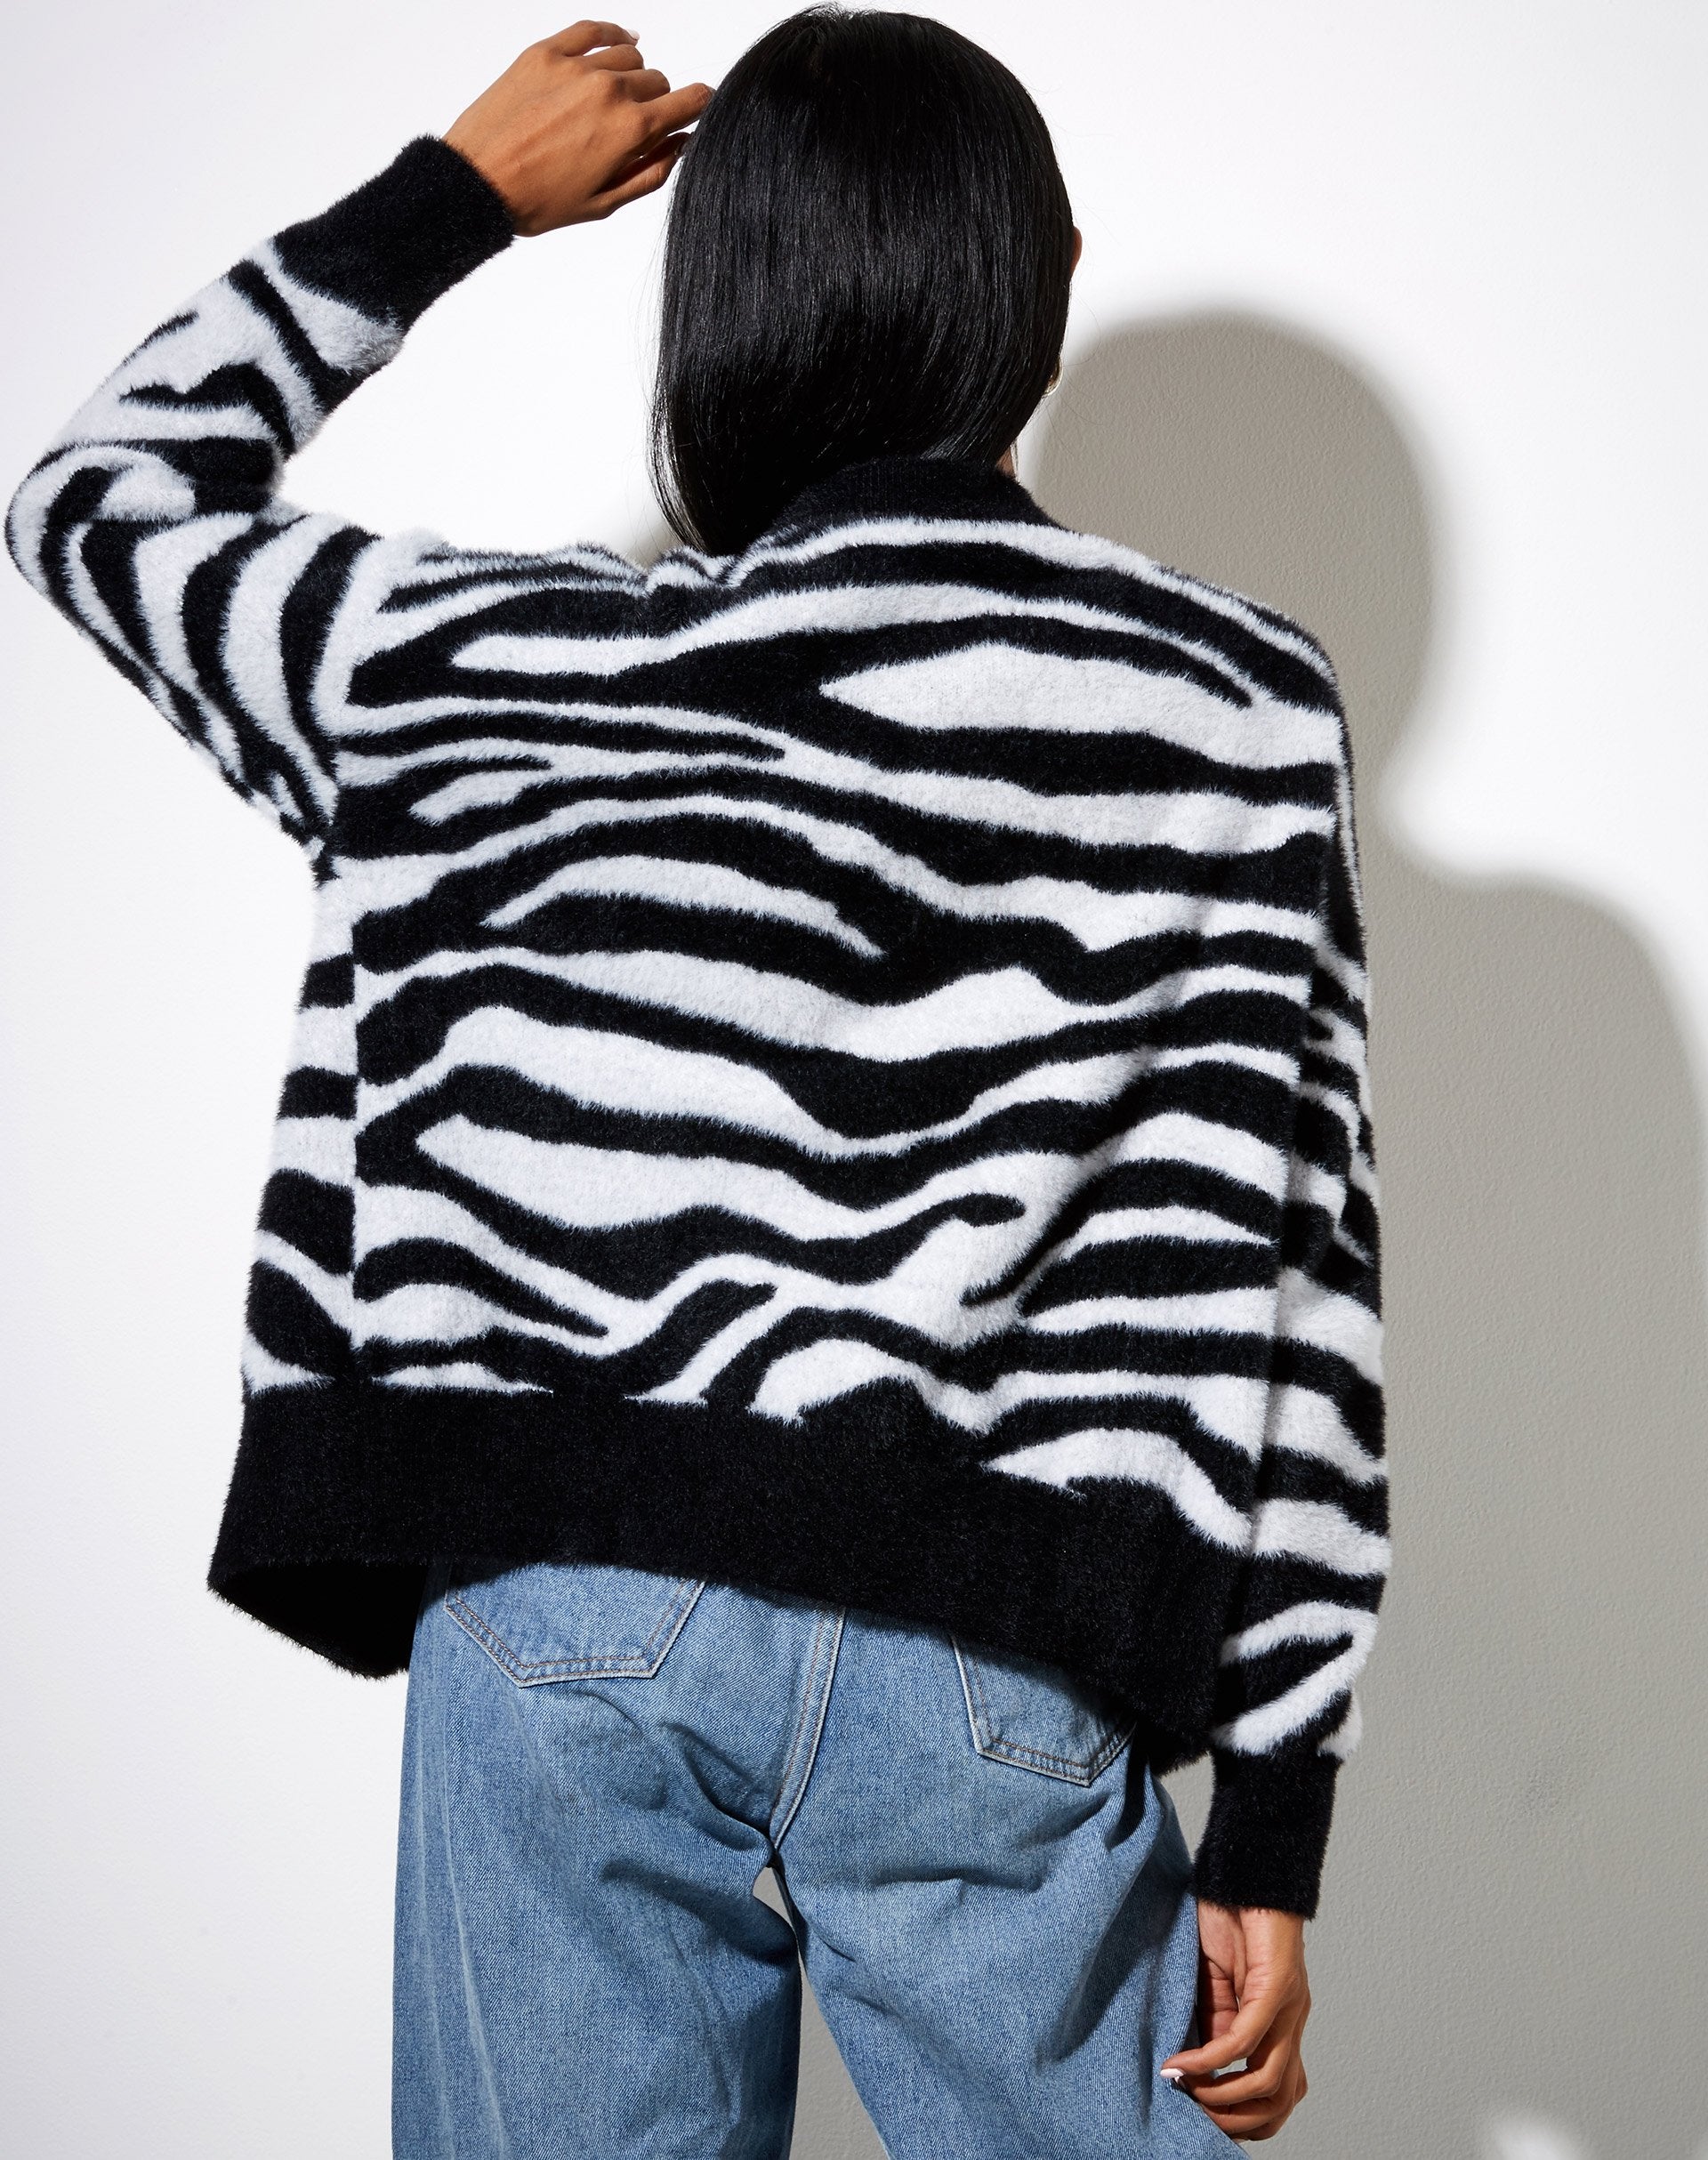 Image of Uriela Cardigan in Knit Zebra Black and White